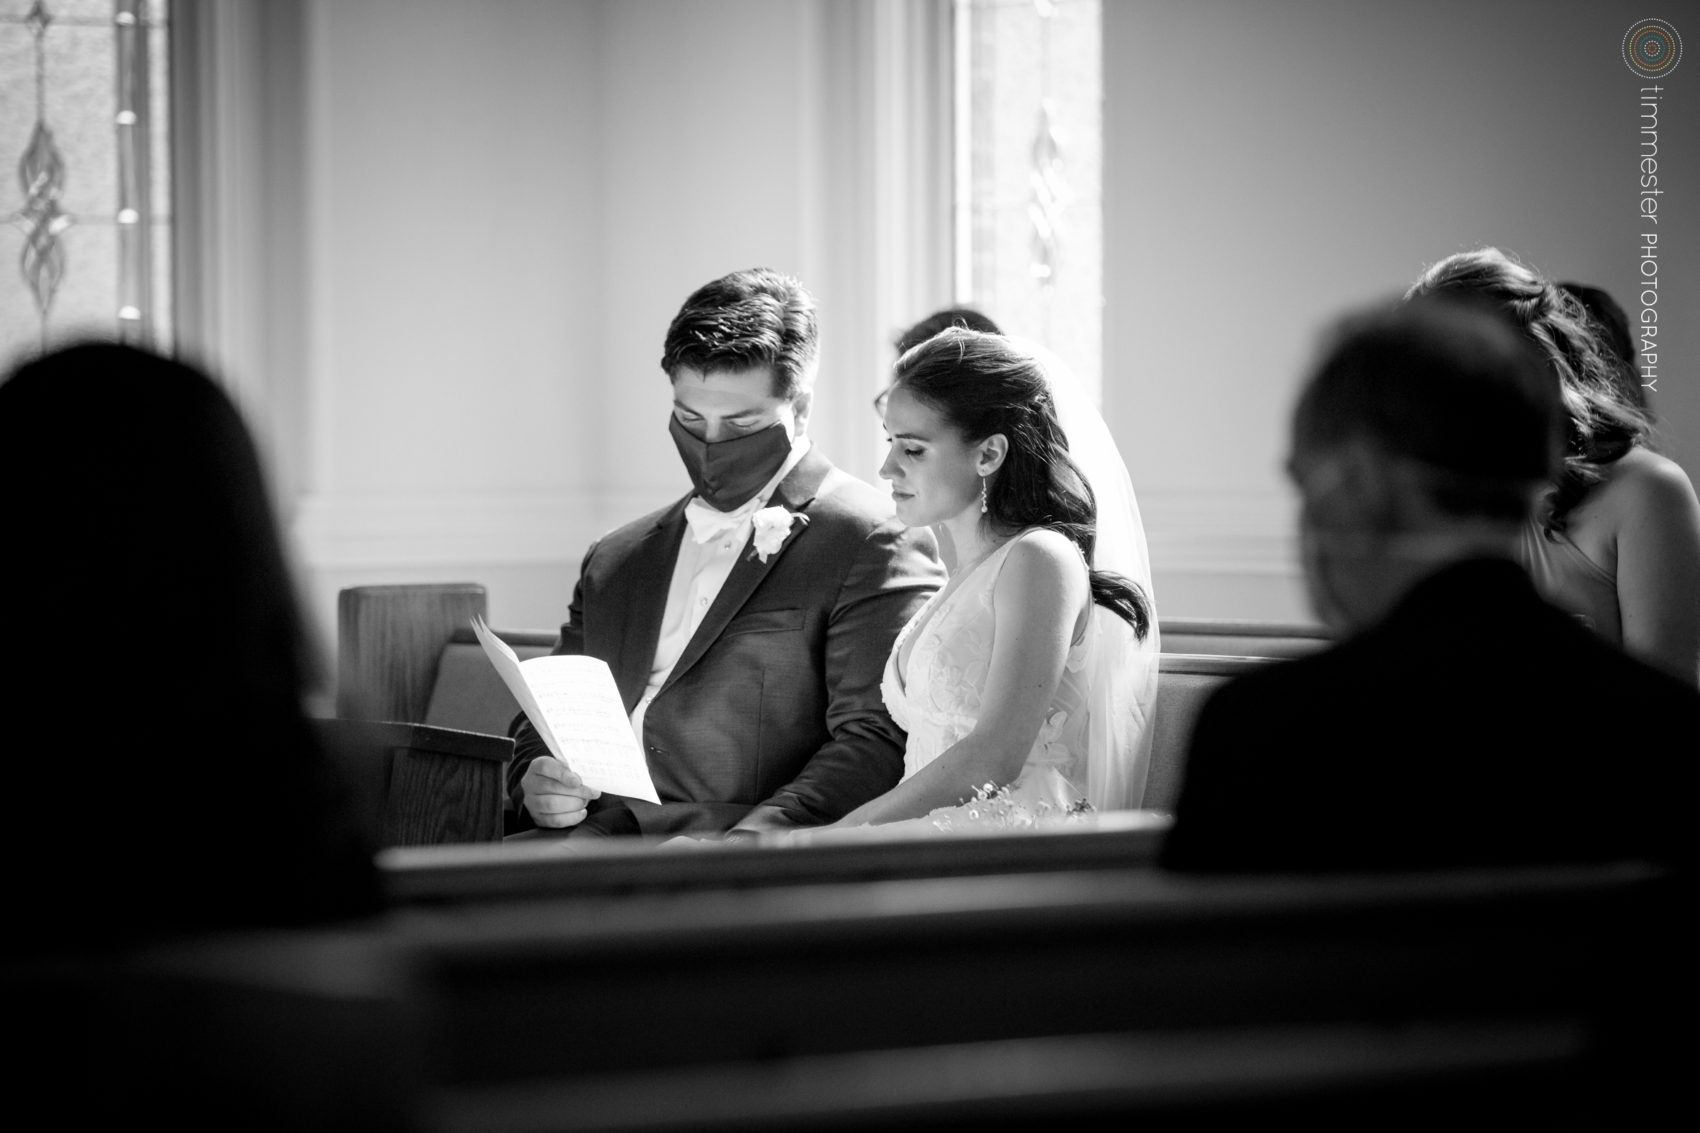 Wedding ceremony at St Thomas More Catholic Church in Chapel Hill, NC